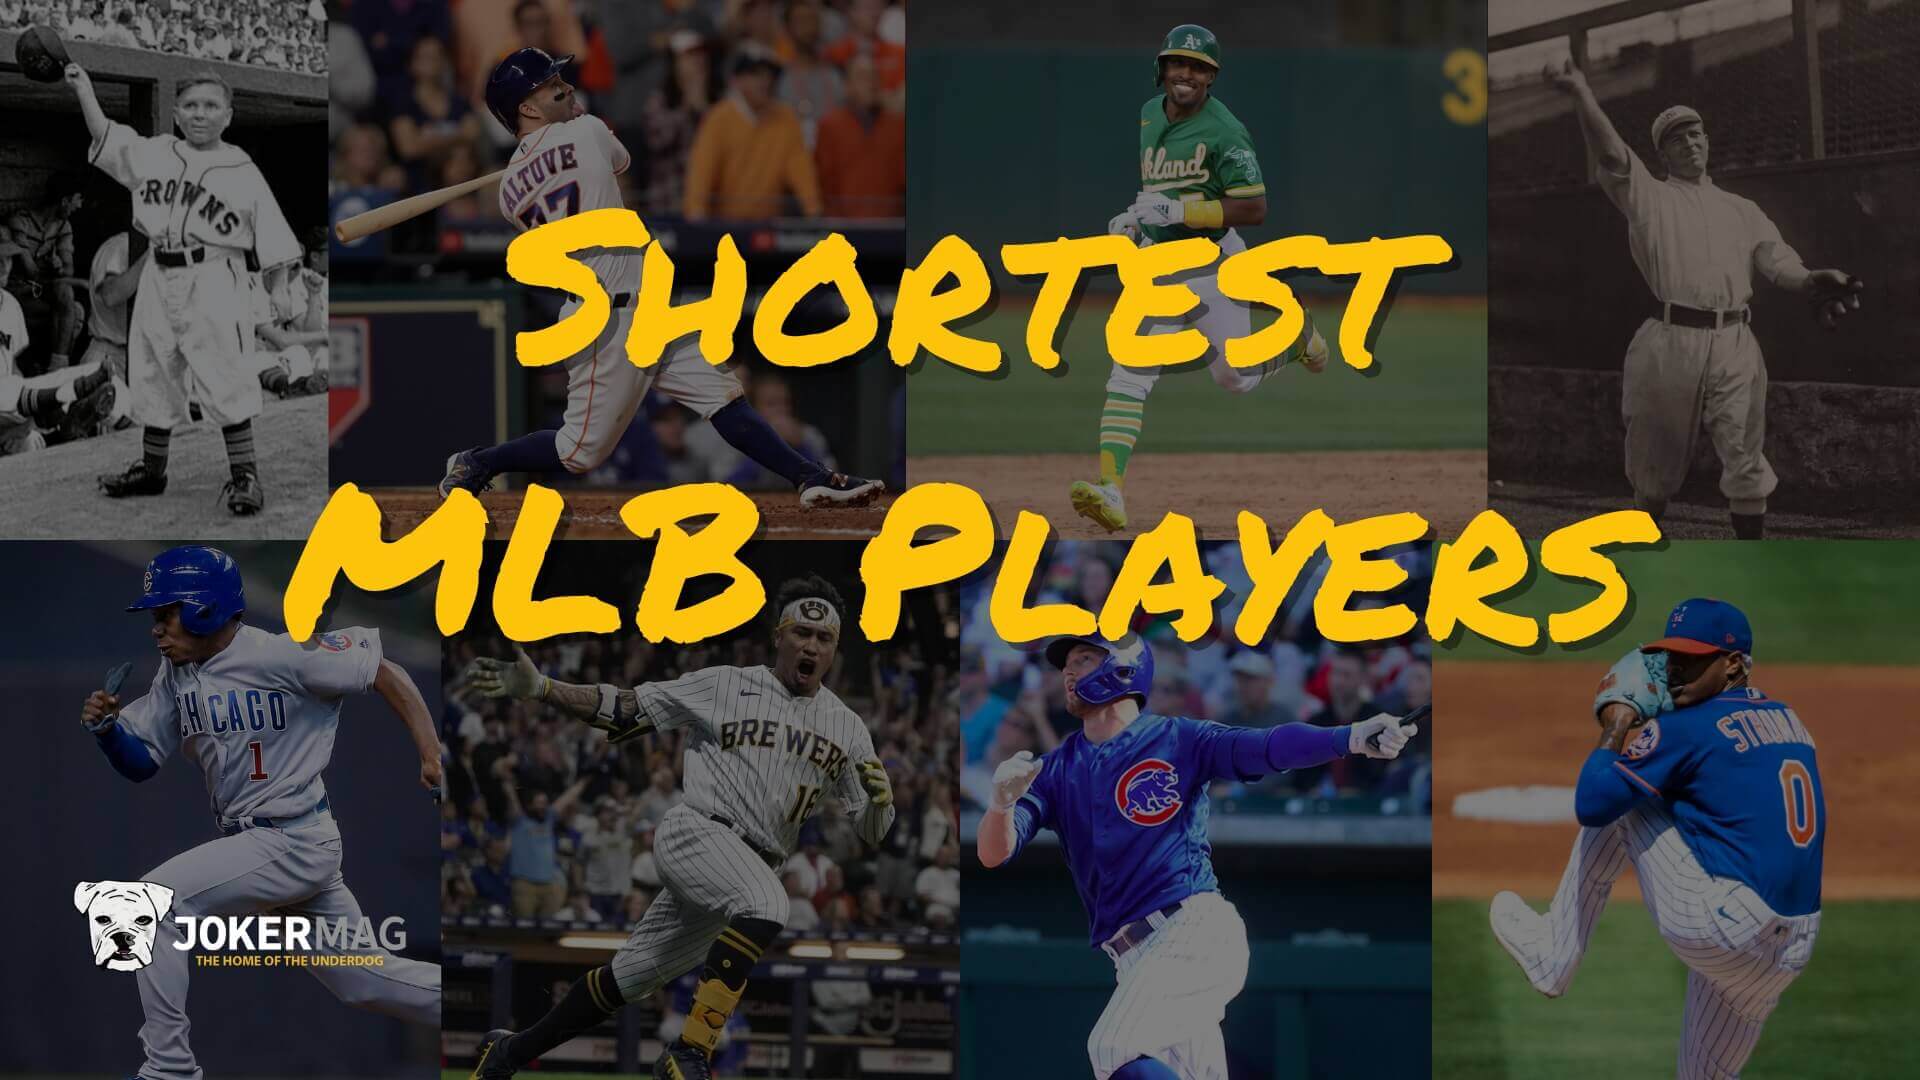 The shortest MLB players in 2021 and throughout baseball history